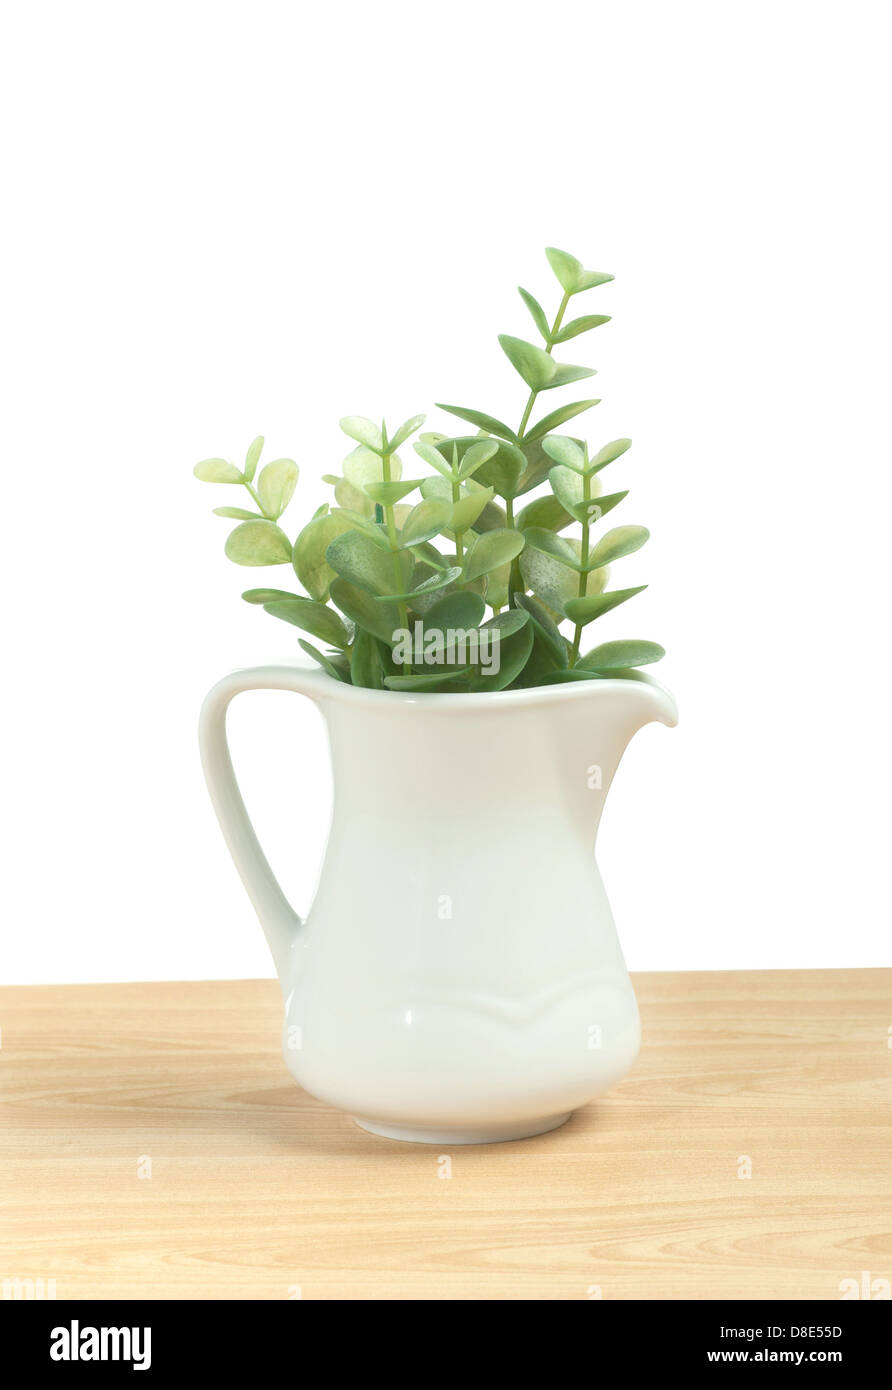 Artificial leafs in small pitcher for home decoration Stock Photo